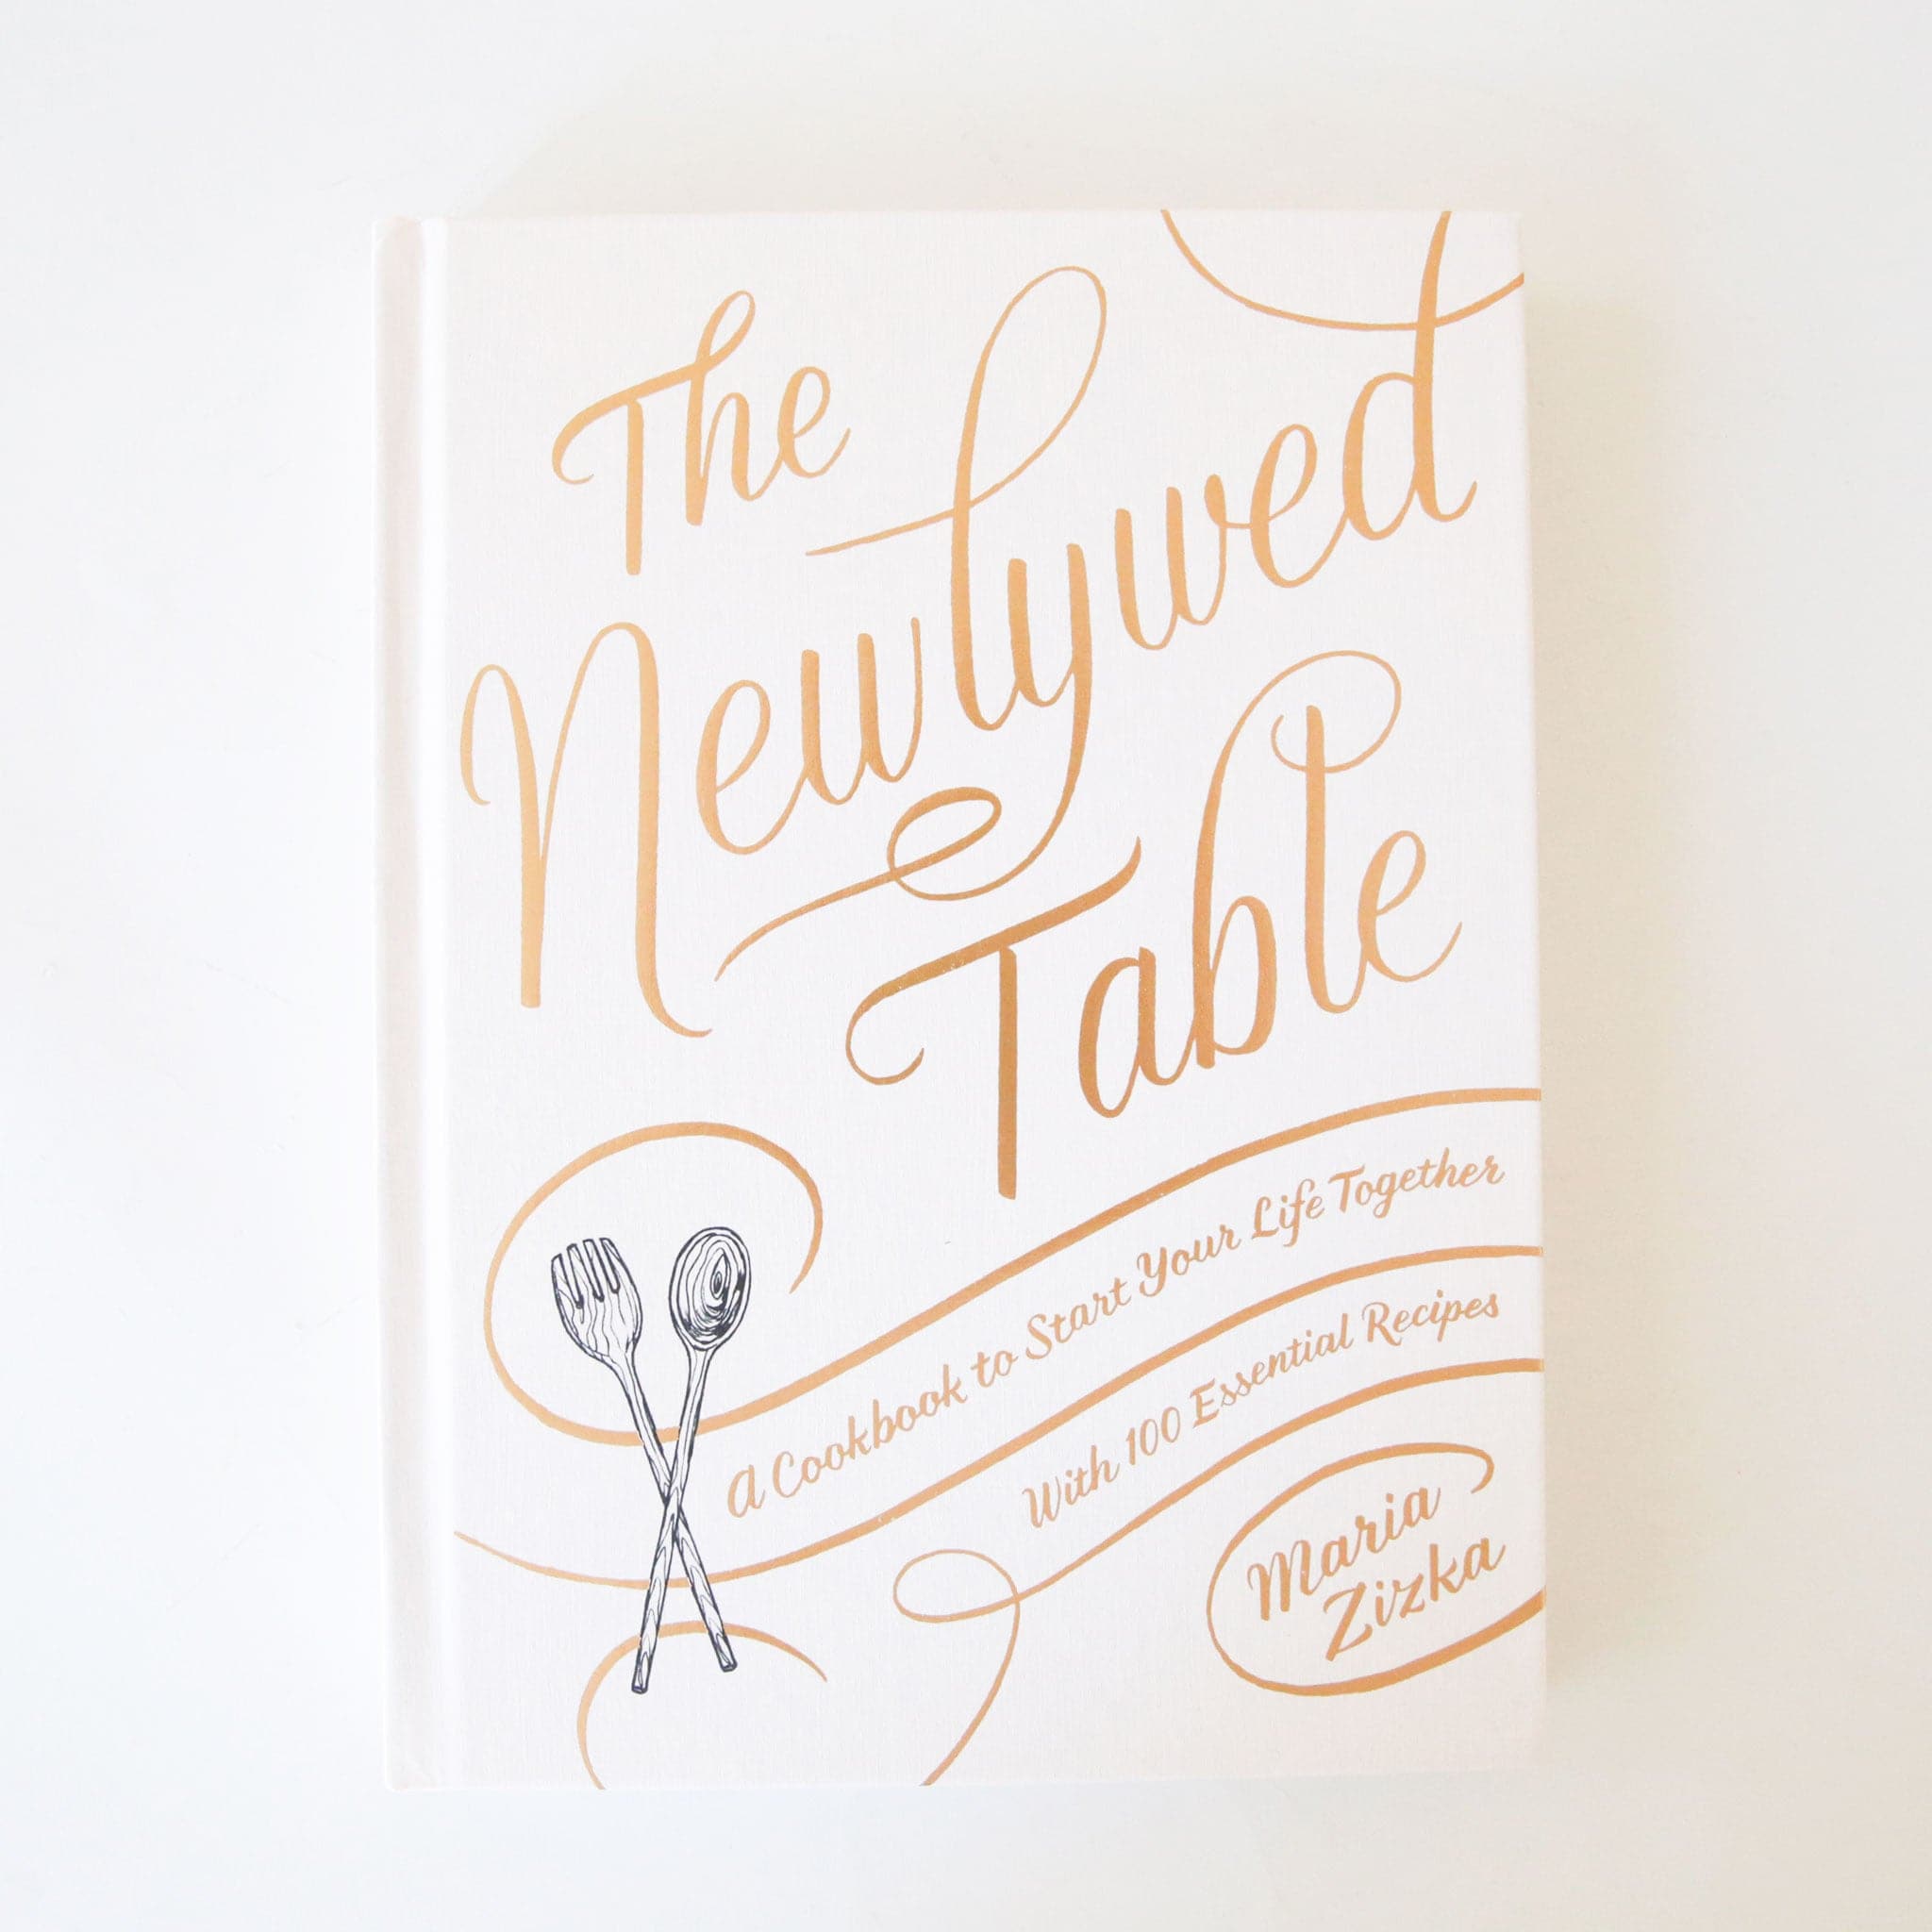 White hardcover book titled 'The newlywed table' in gold foil cursive lettering. Below reads 'a cookbook to start your life together with 100 essential recipes'. A black and white wooden spork and spoon sits in the bottom left corner. 